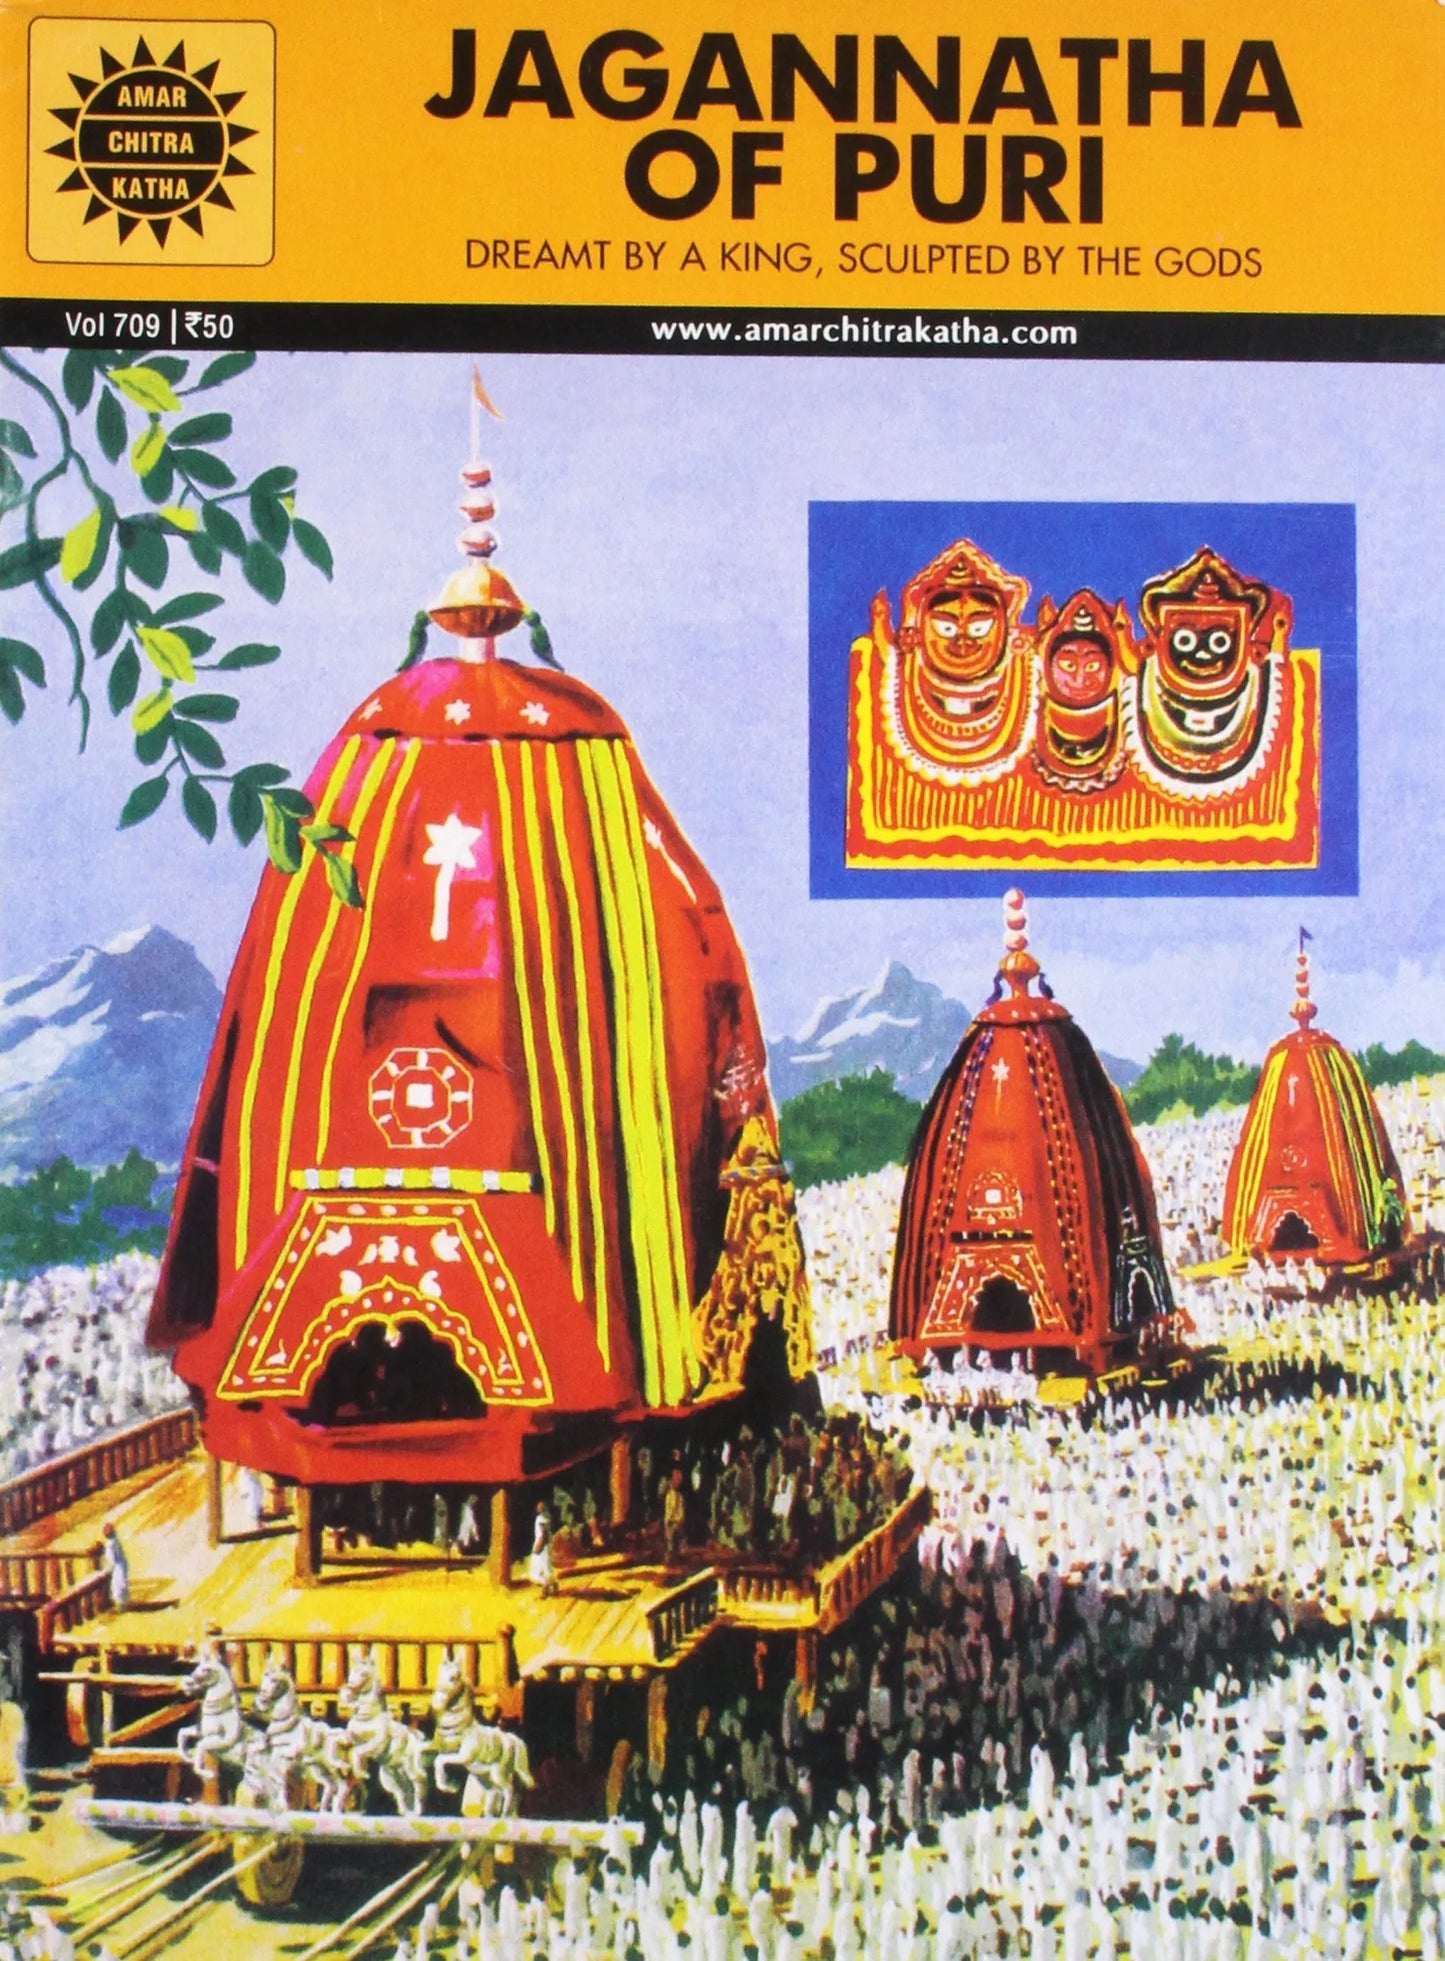 Amar Chitra Katha - Jagannatha Of Puri - Dreamnt By a King, Sculpted by Gods